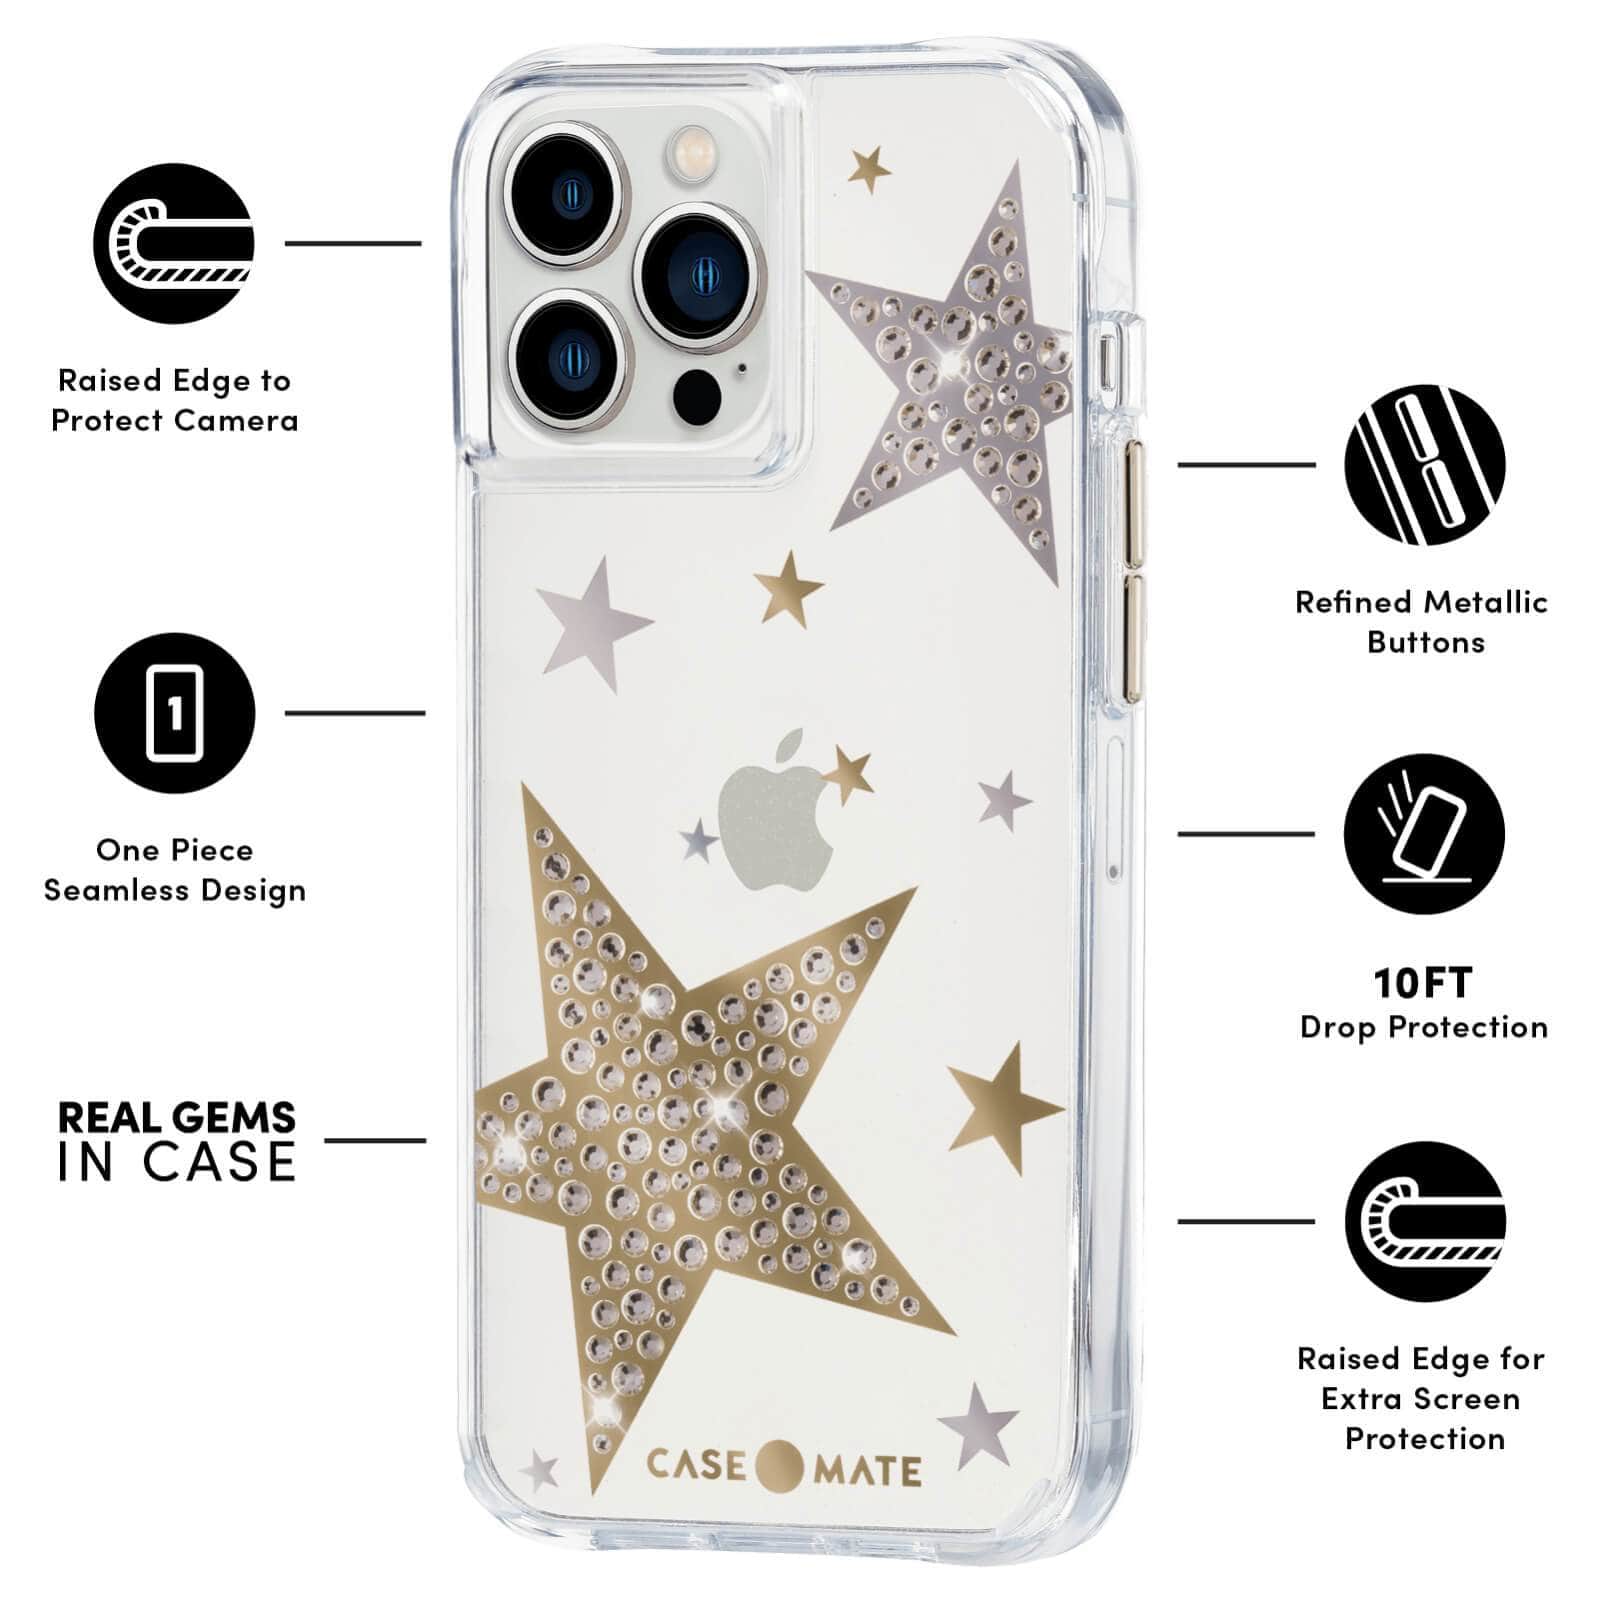 FEATURES: RAISED EDGE TO PROTECT CAMERA, ONE PIECE SEAMLESS DESIGN, REAL GEMS IN CASE, REFINED METALLIC BUTTONS, 10 FT DROP PROTECTION, RAISED EDGE FOR EXTRA SCREEN PROTECTION. COLOR::SHEER SUPERSTAR